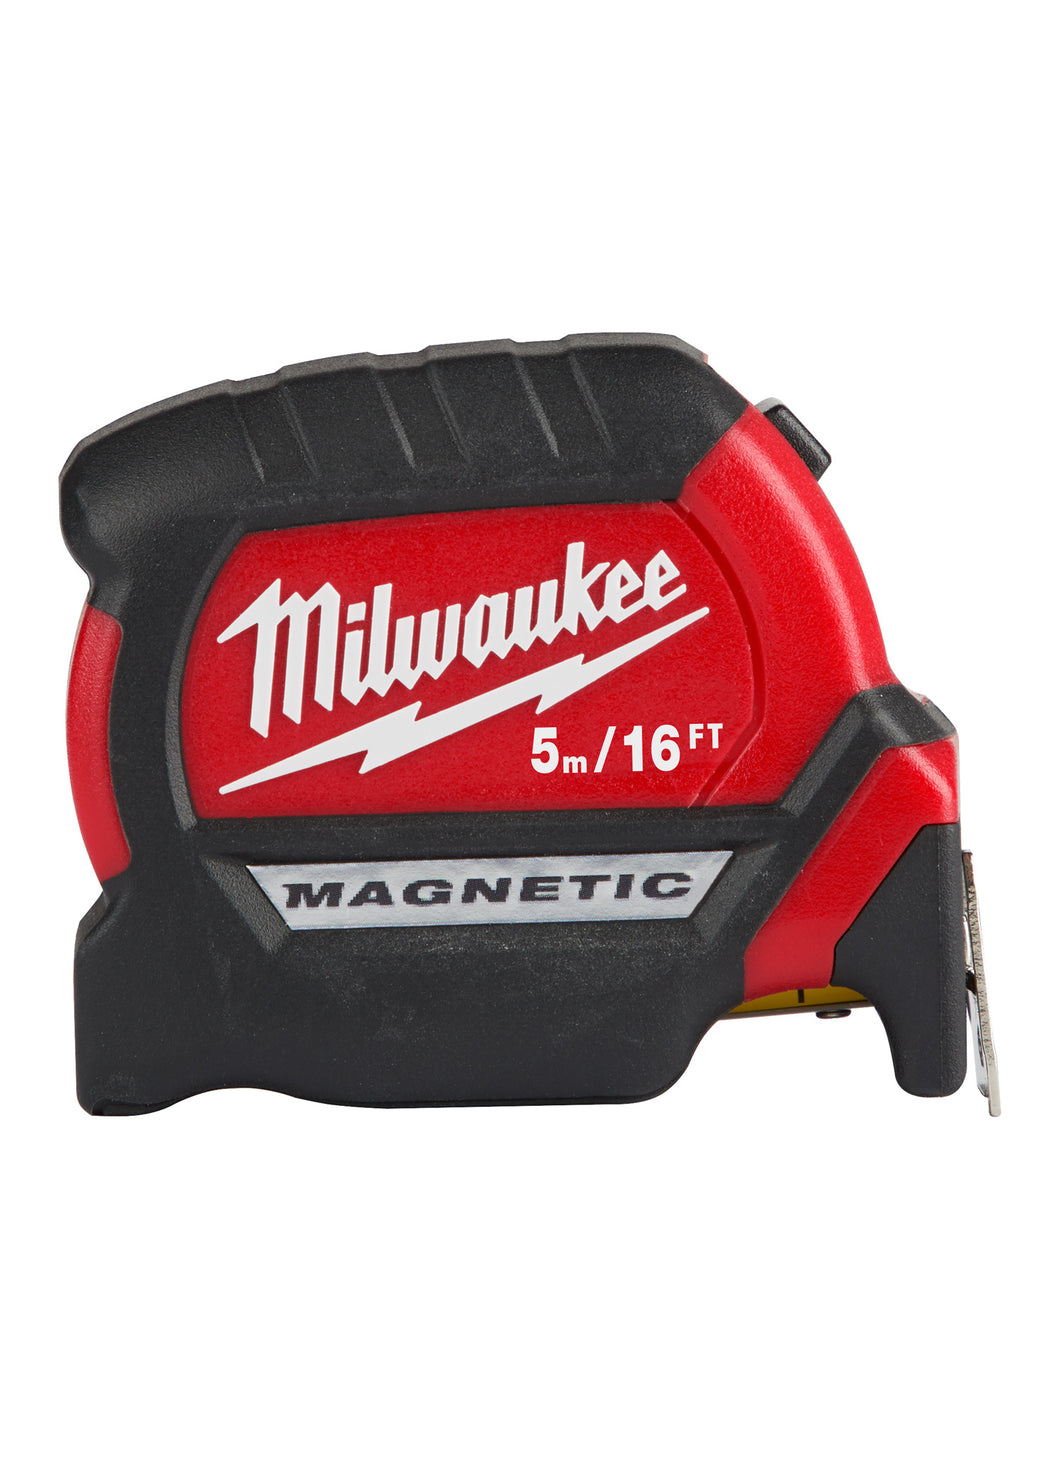 MILWAUKEE Compact Wide Blade Magnetic Tape Measures